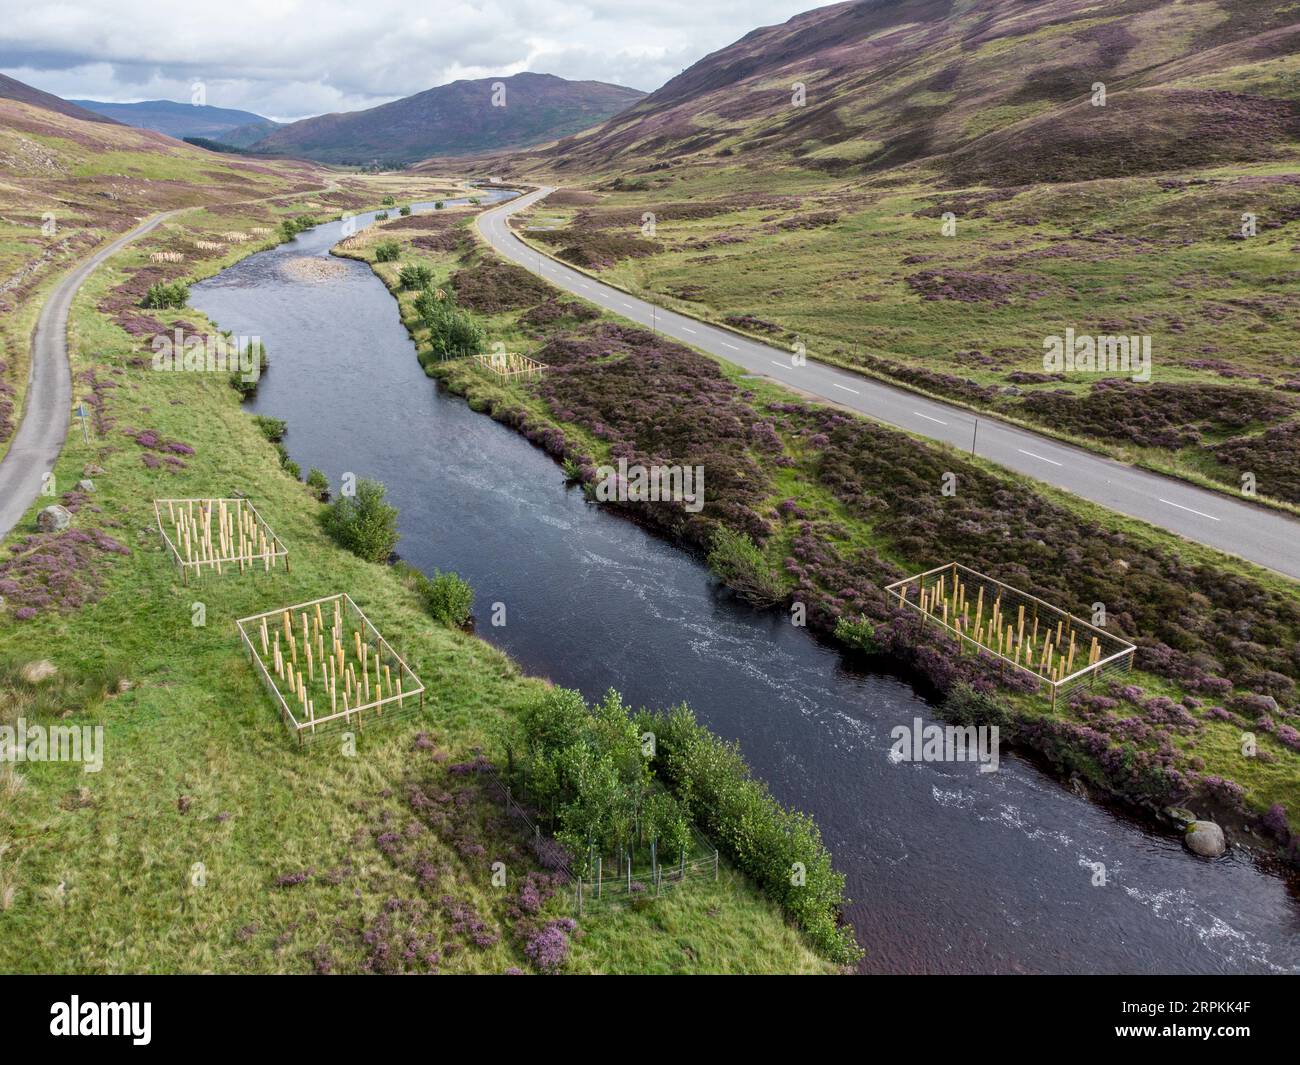 Tree planting to shade river part of river clunie retoration project near Braemar Scotland Stock Photo